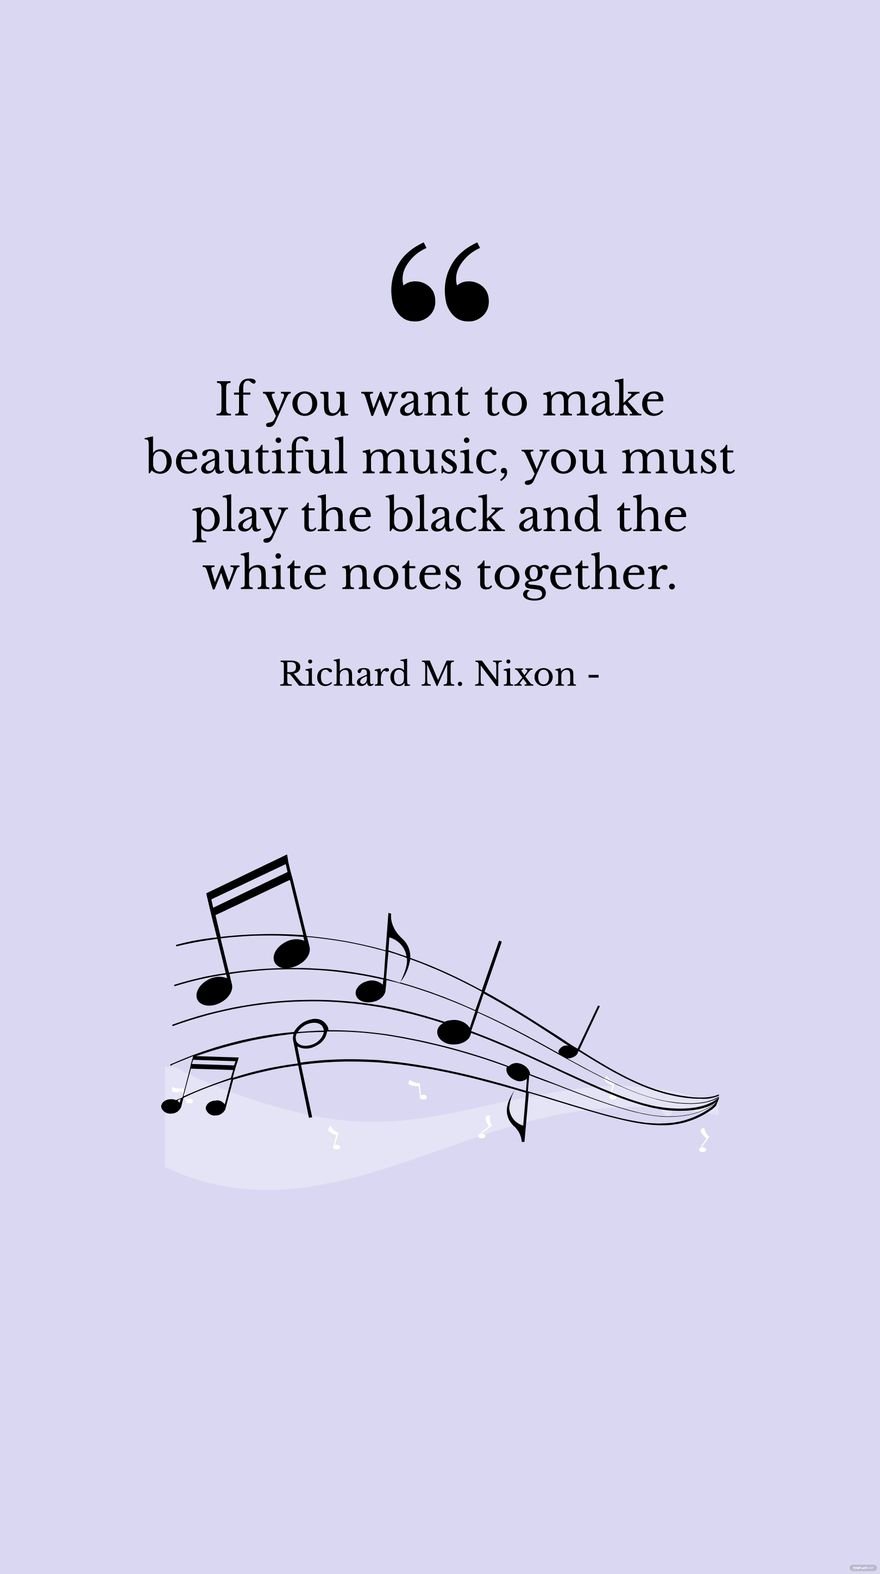 Richard M. Nixon - If you want to make beautiful music, you must play the black and the white notes together.